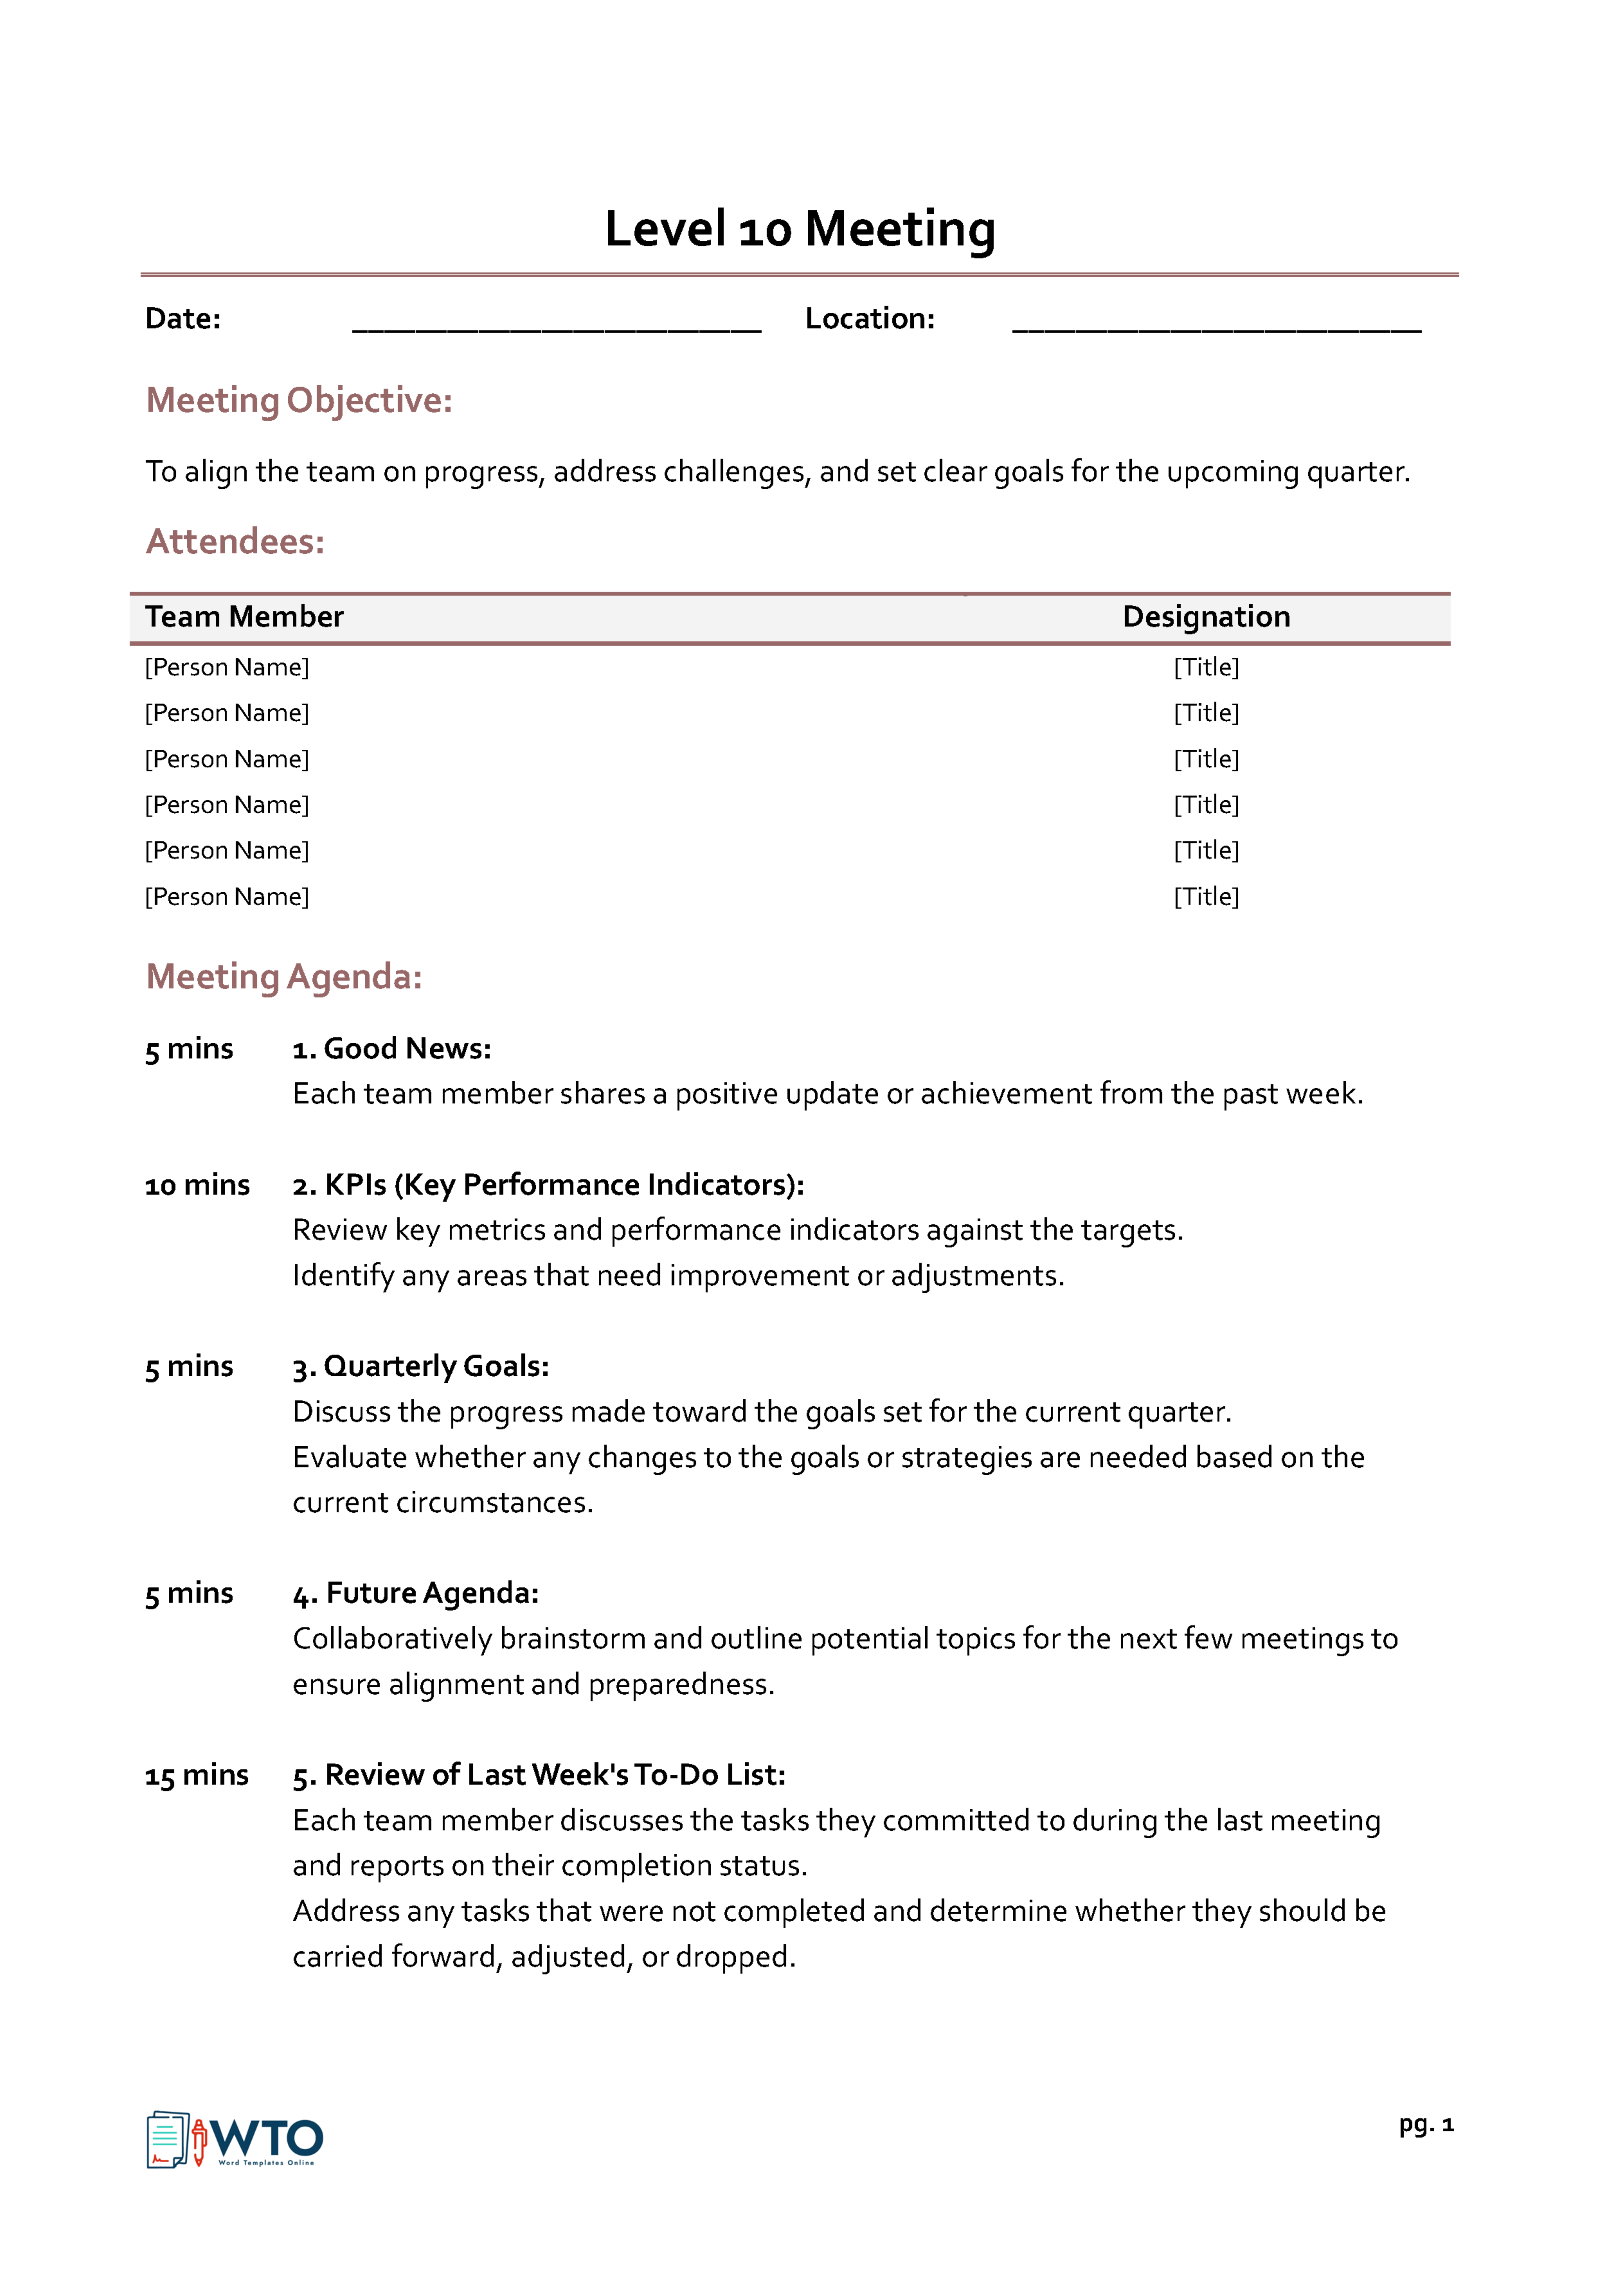 Effective Agenda for Level 10 Meeting - Free Template